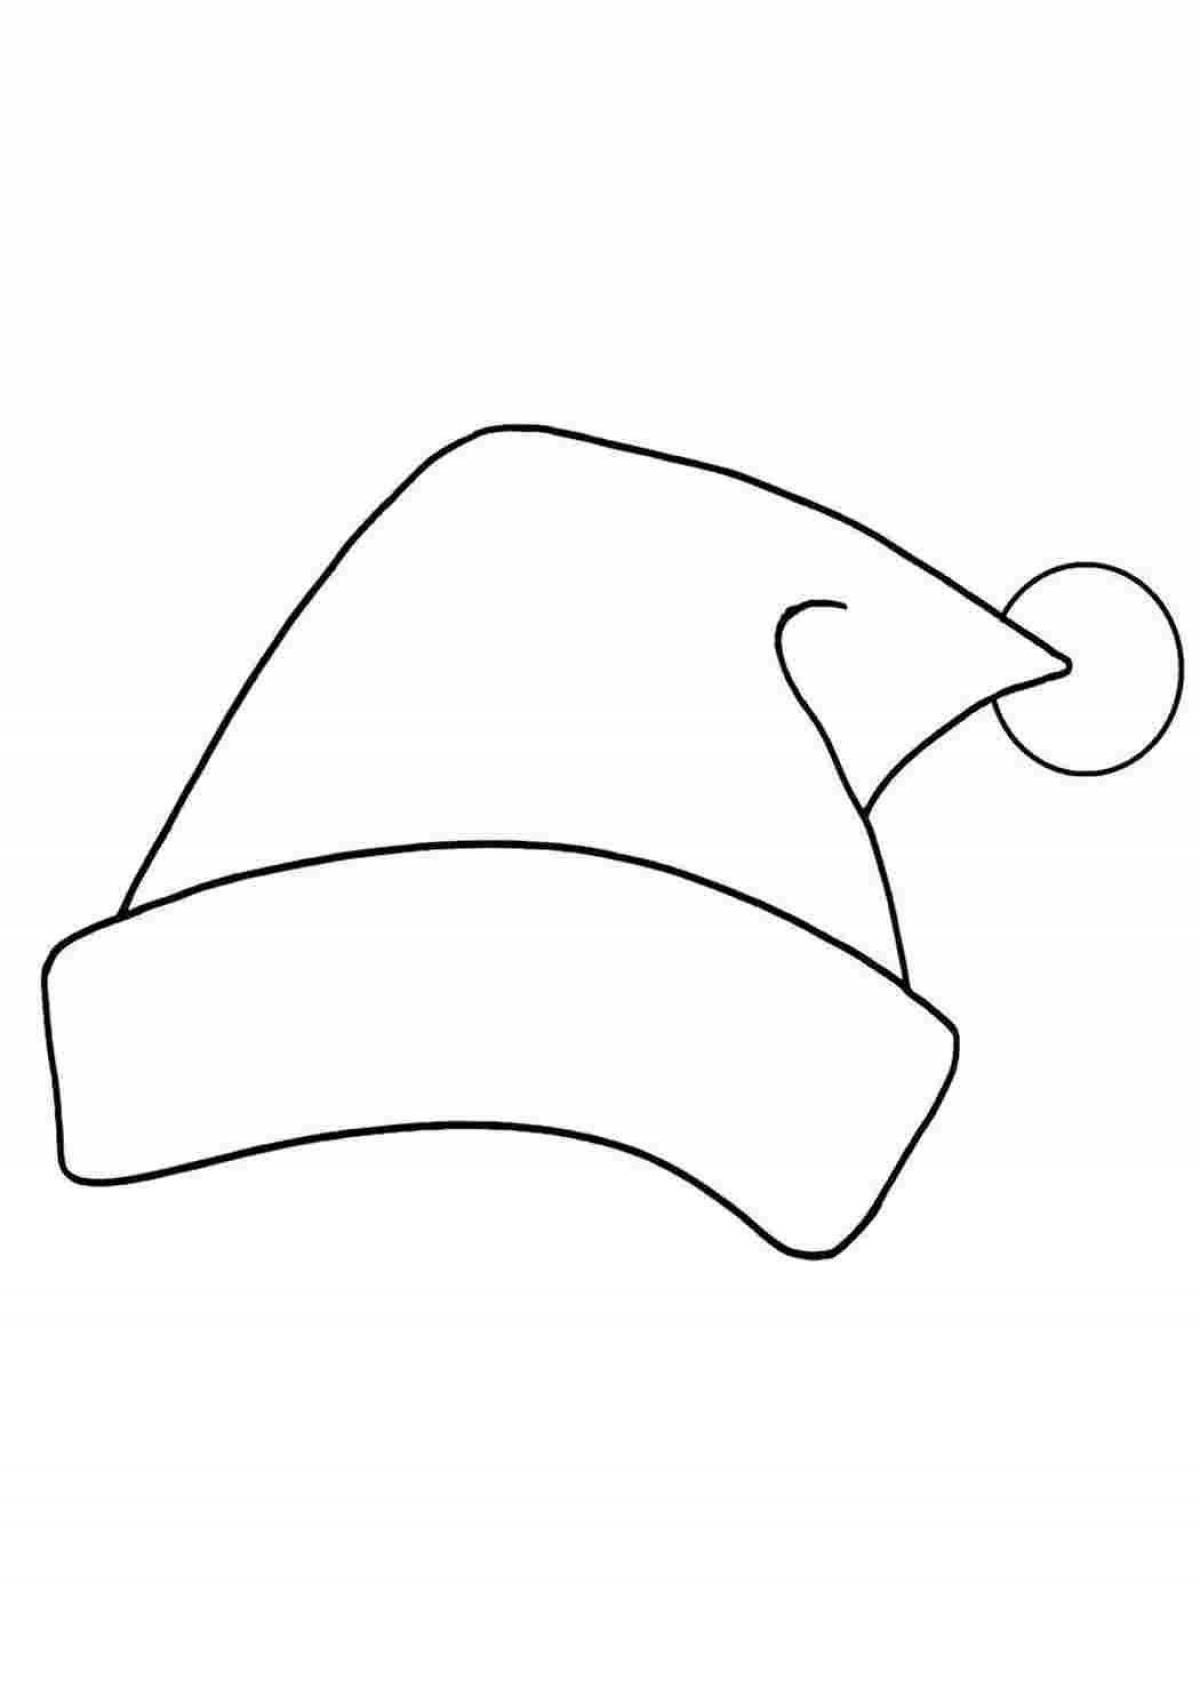 Colouring smooth Christmas hat